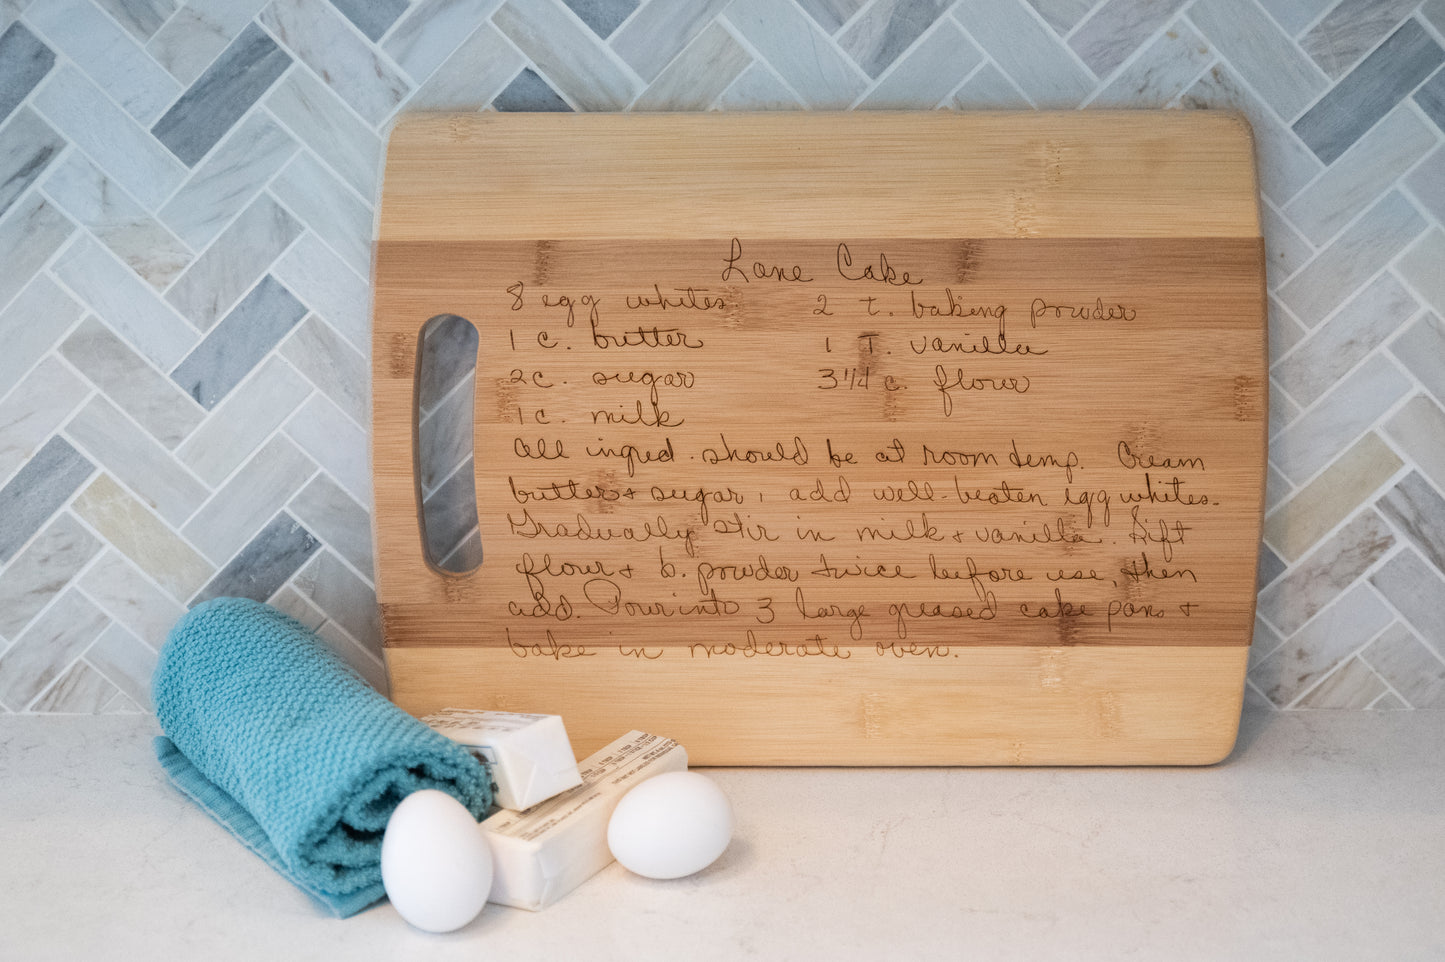 Engraved Bamboo Cutting Boards - Create a One-of-a-Kind Gift with Your Personalized Recipes